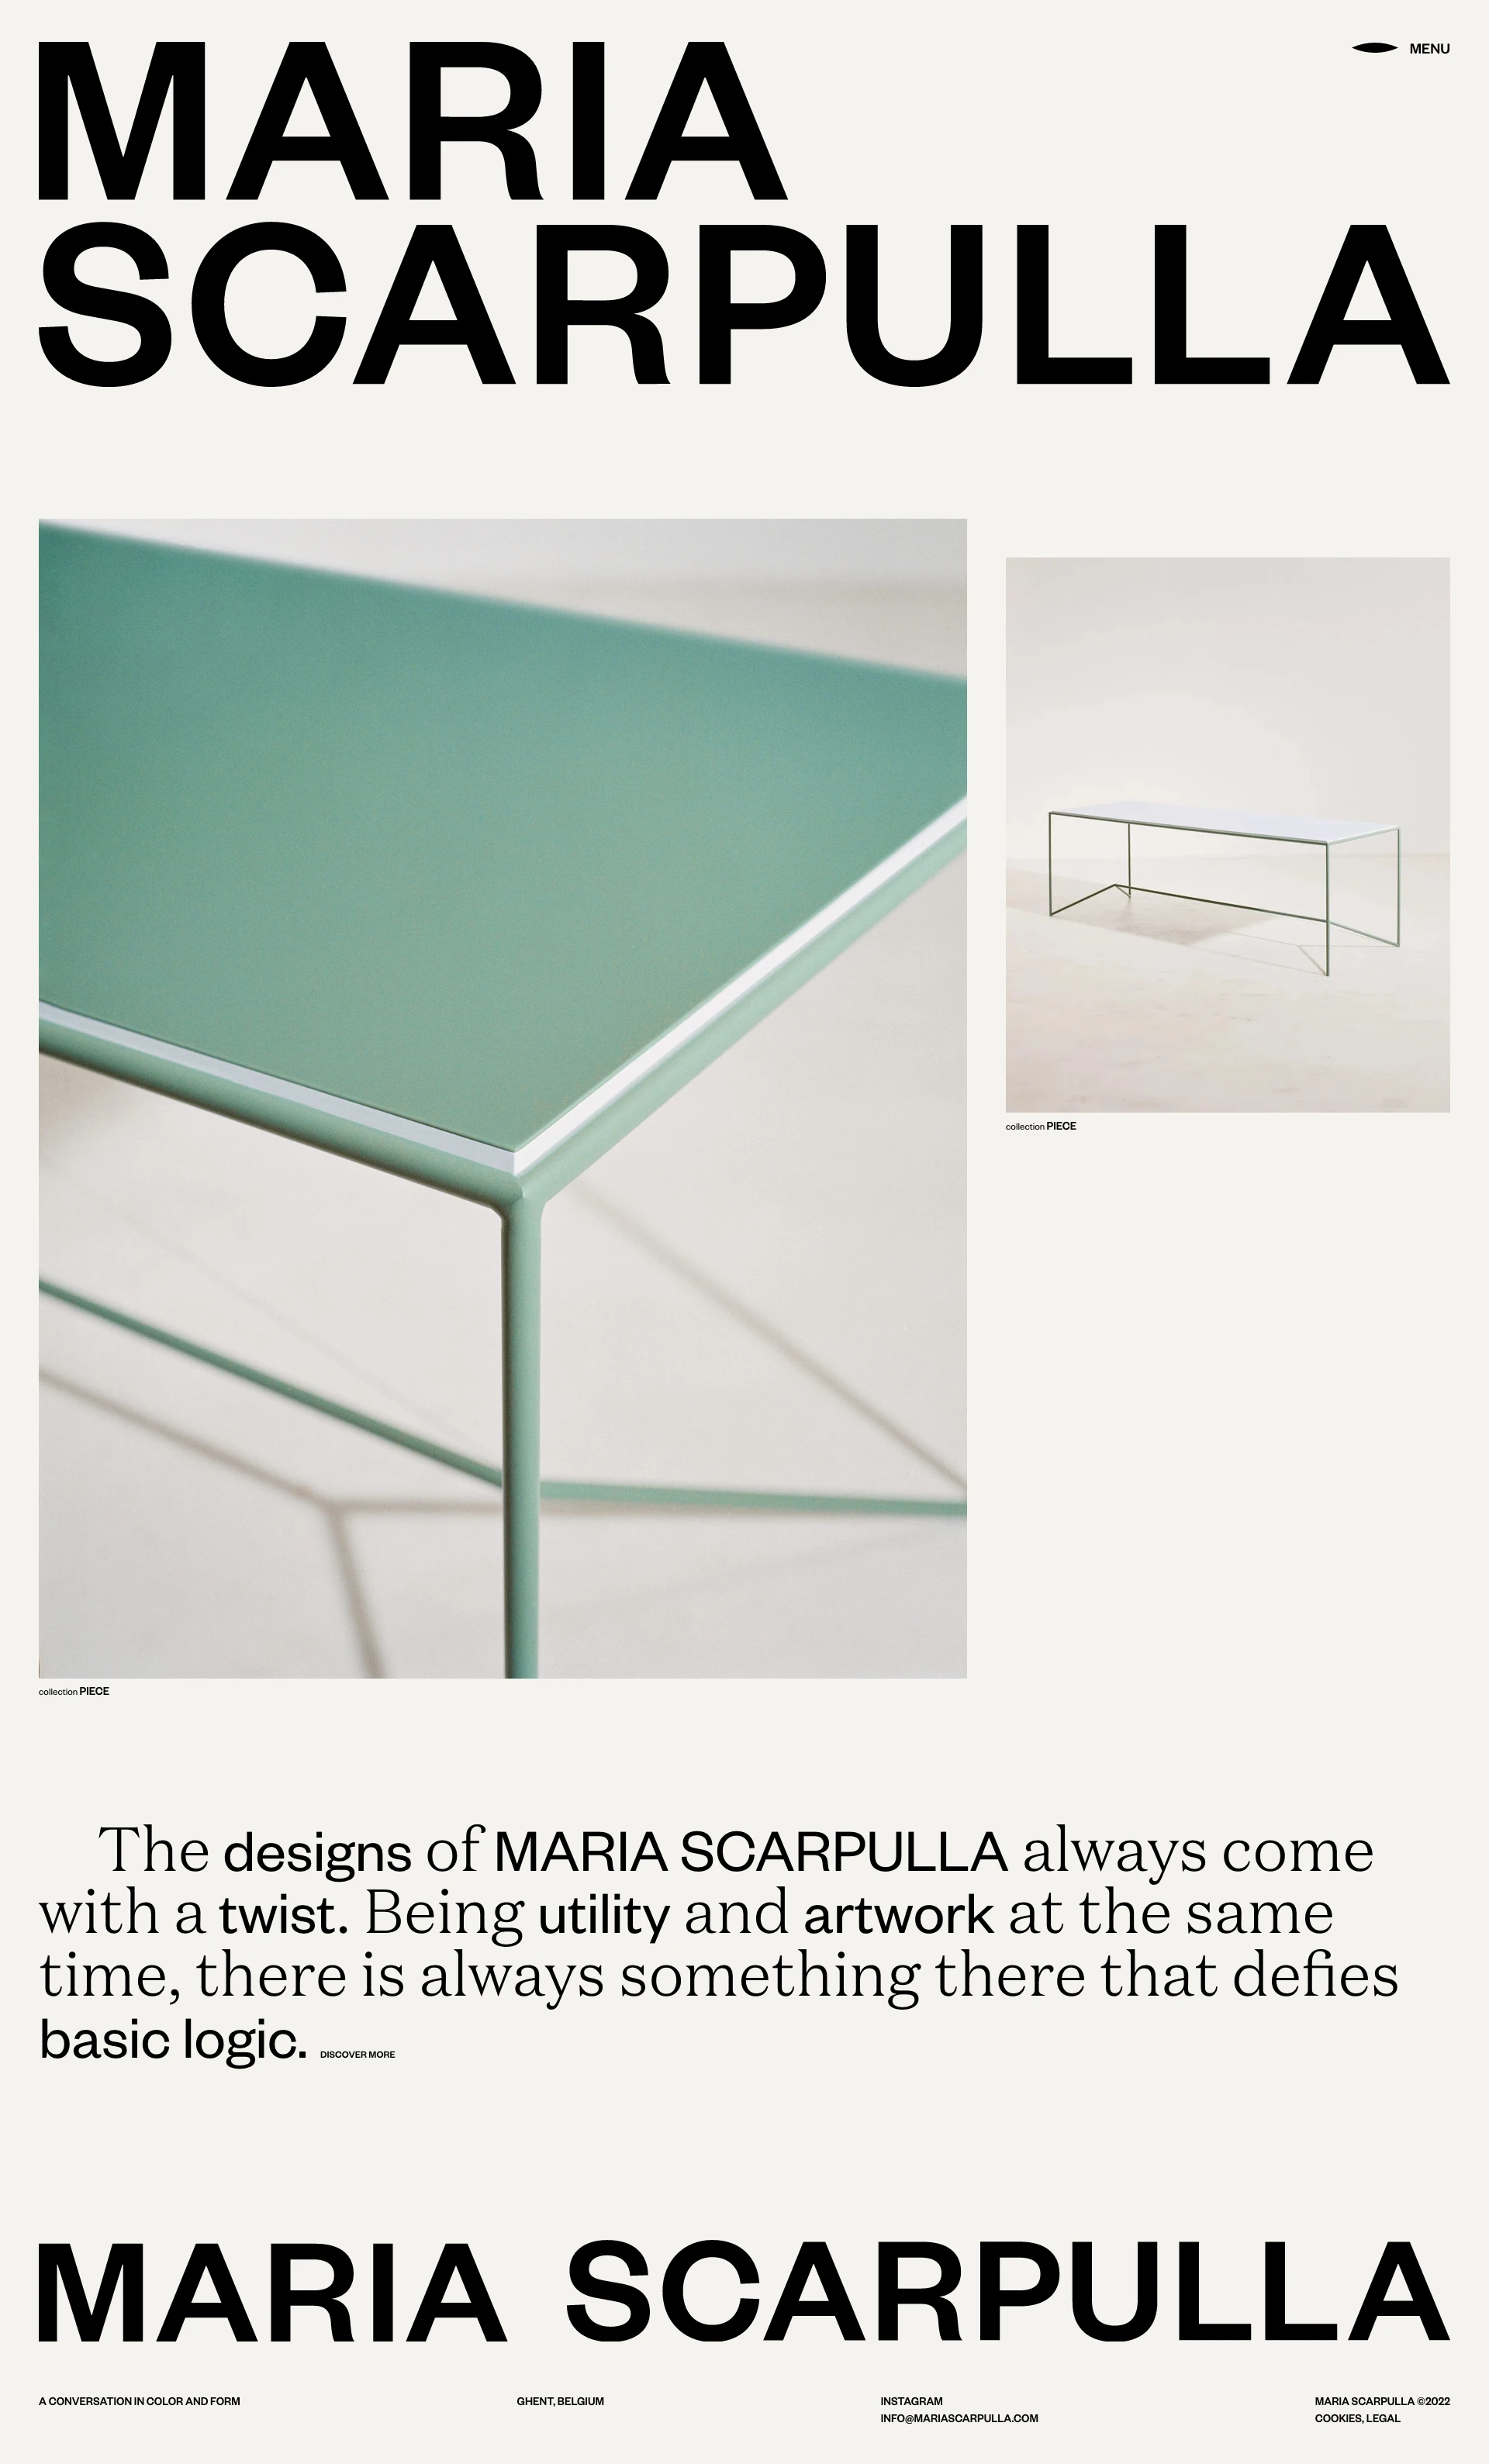 Maria Scarpulla Landing Page Example: A Belgian based design studio run by Maria Scarpulla and Jori Hernalsteen. Their work focusses on piece-furniture and functional objects.